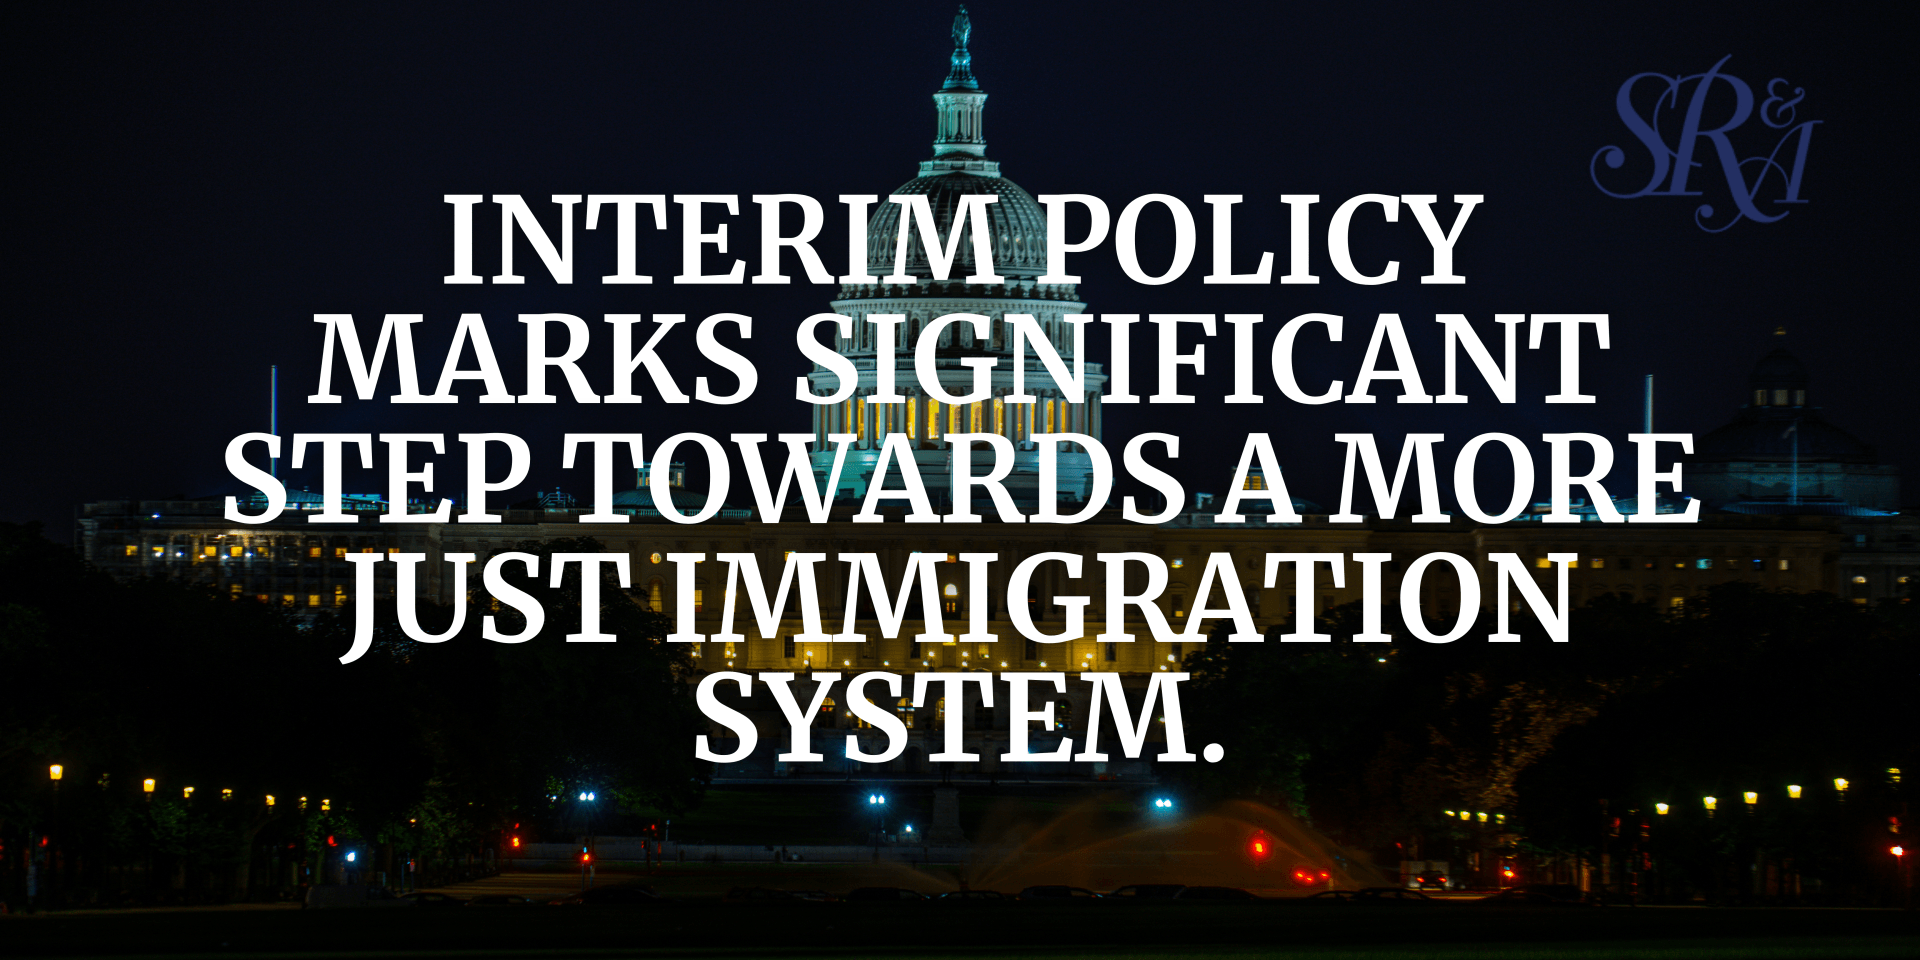 Interim Policy Marks Significant Step Towards a More Just Immigration System.